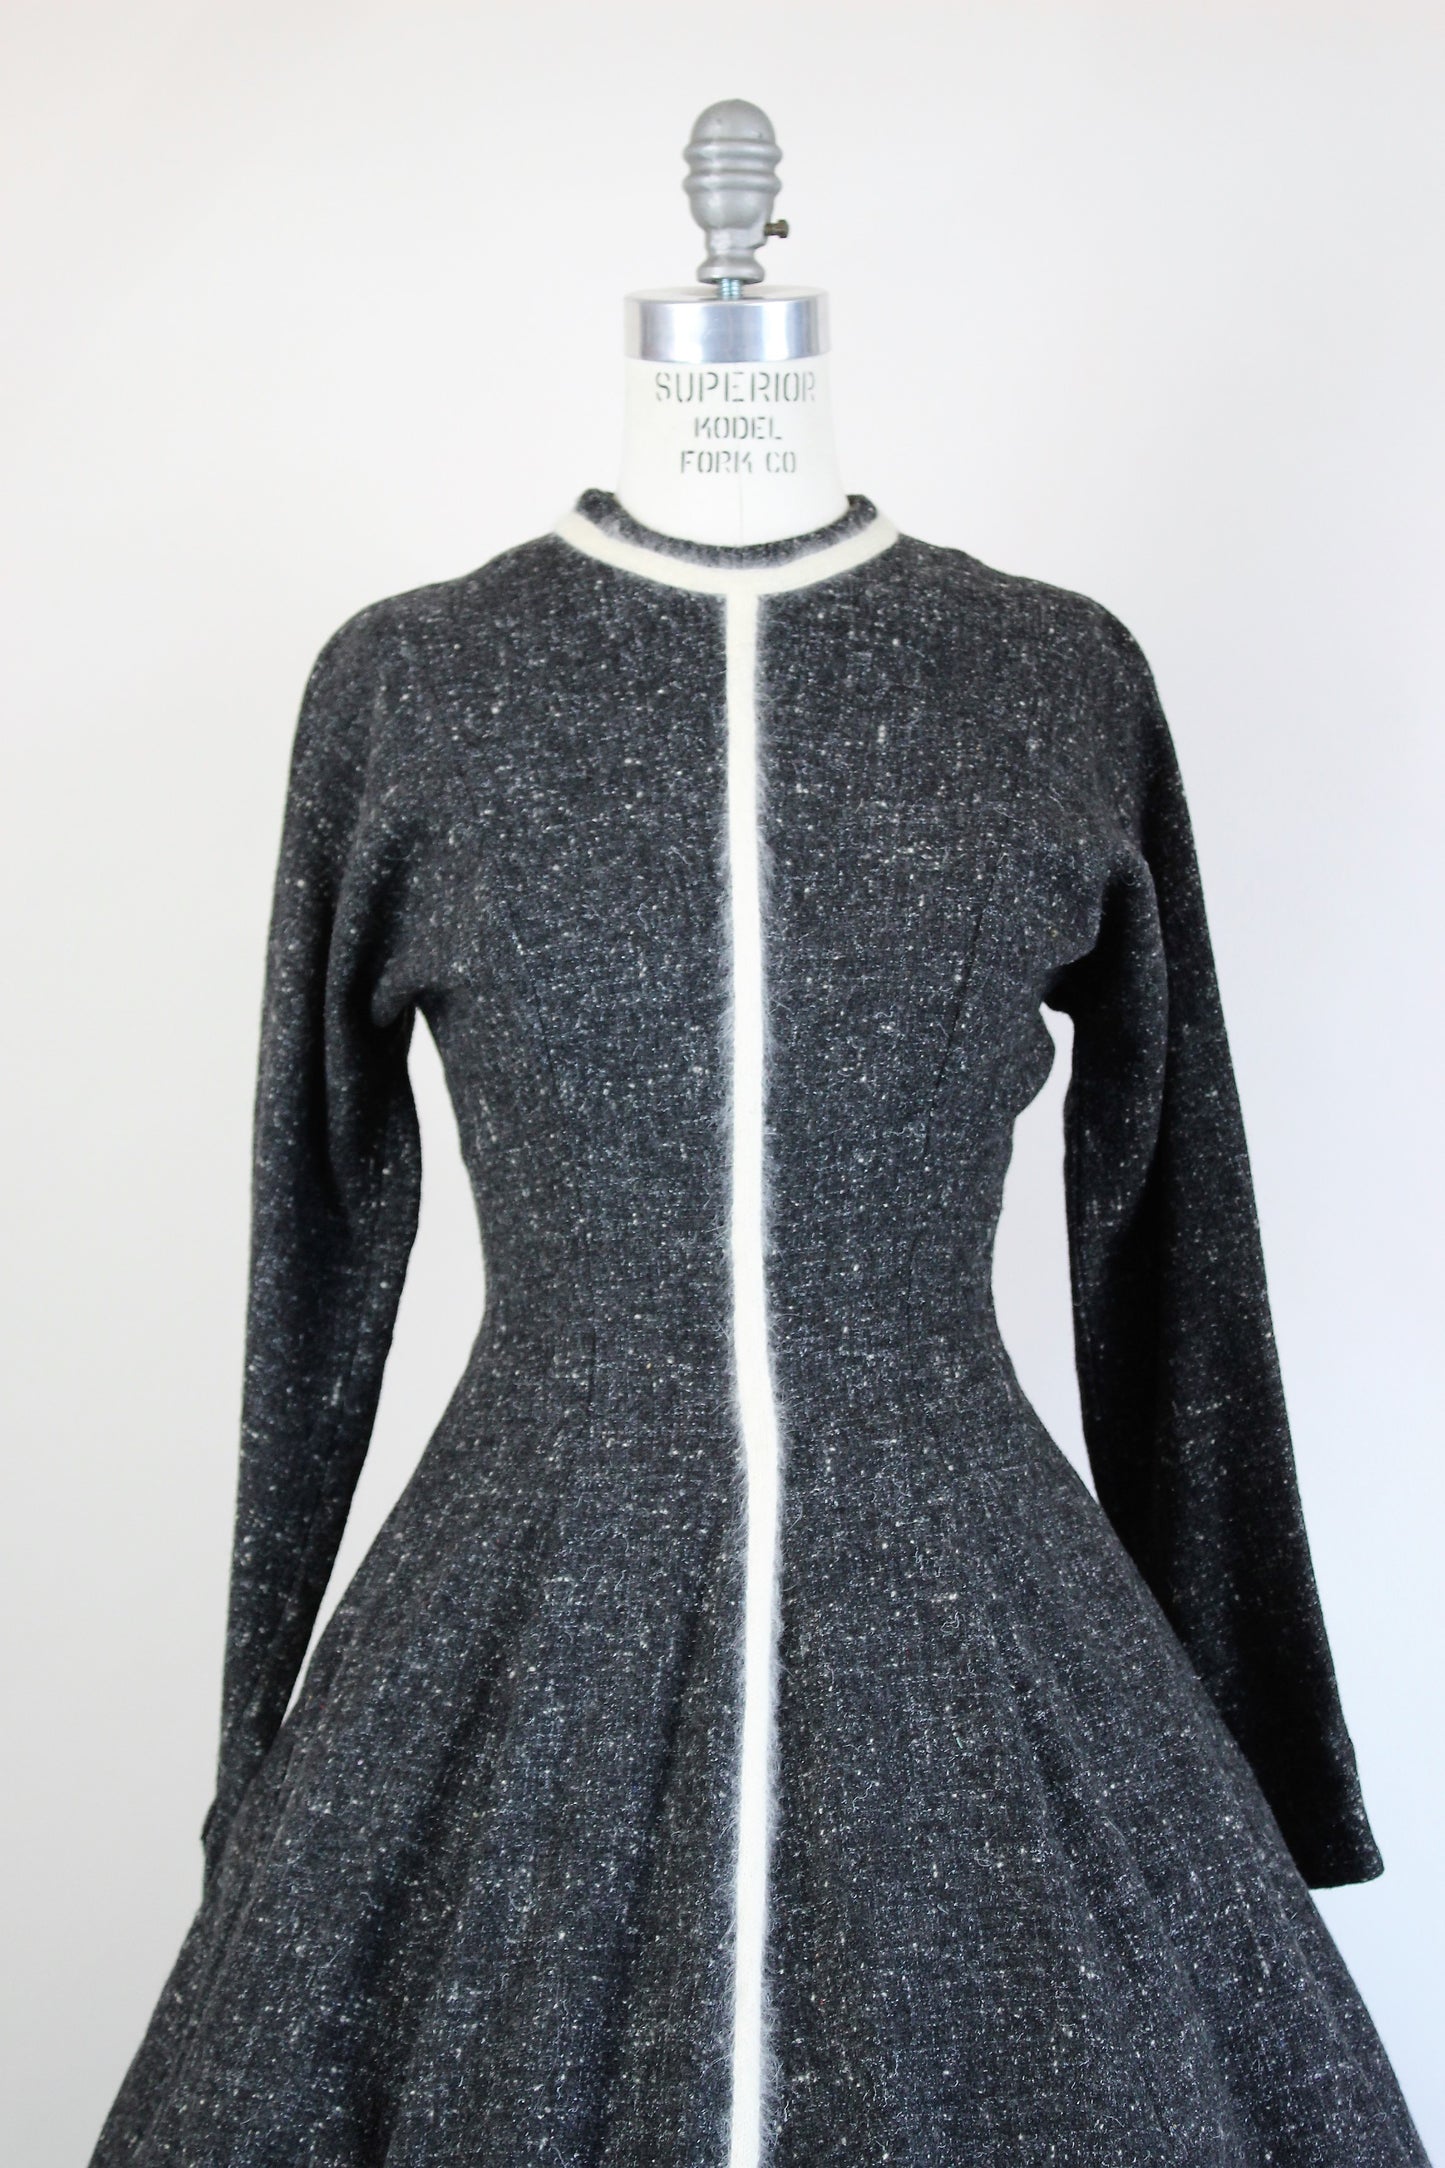 Vintage 1950s Beldon Cann New Look Gray Tweed Dress With Pockets And Angora Trim